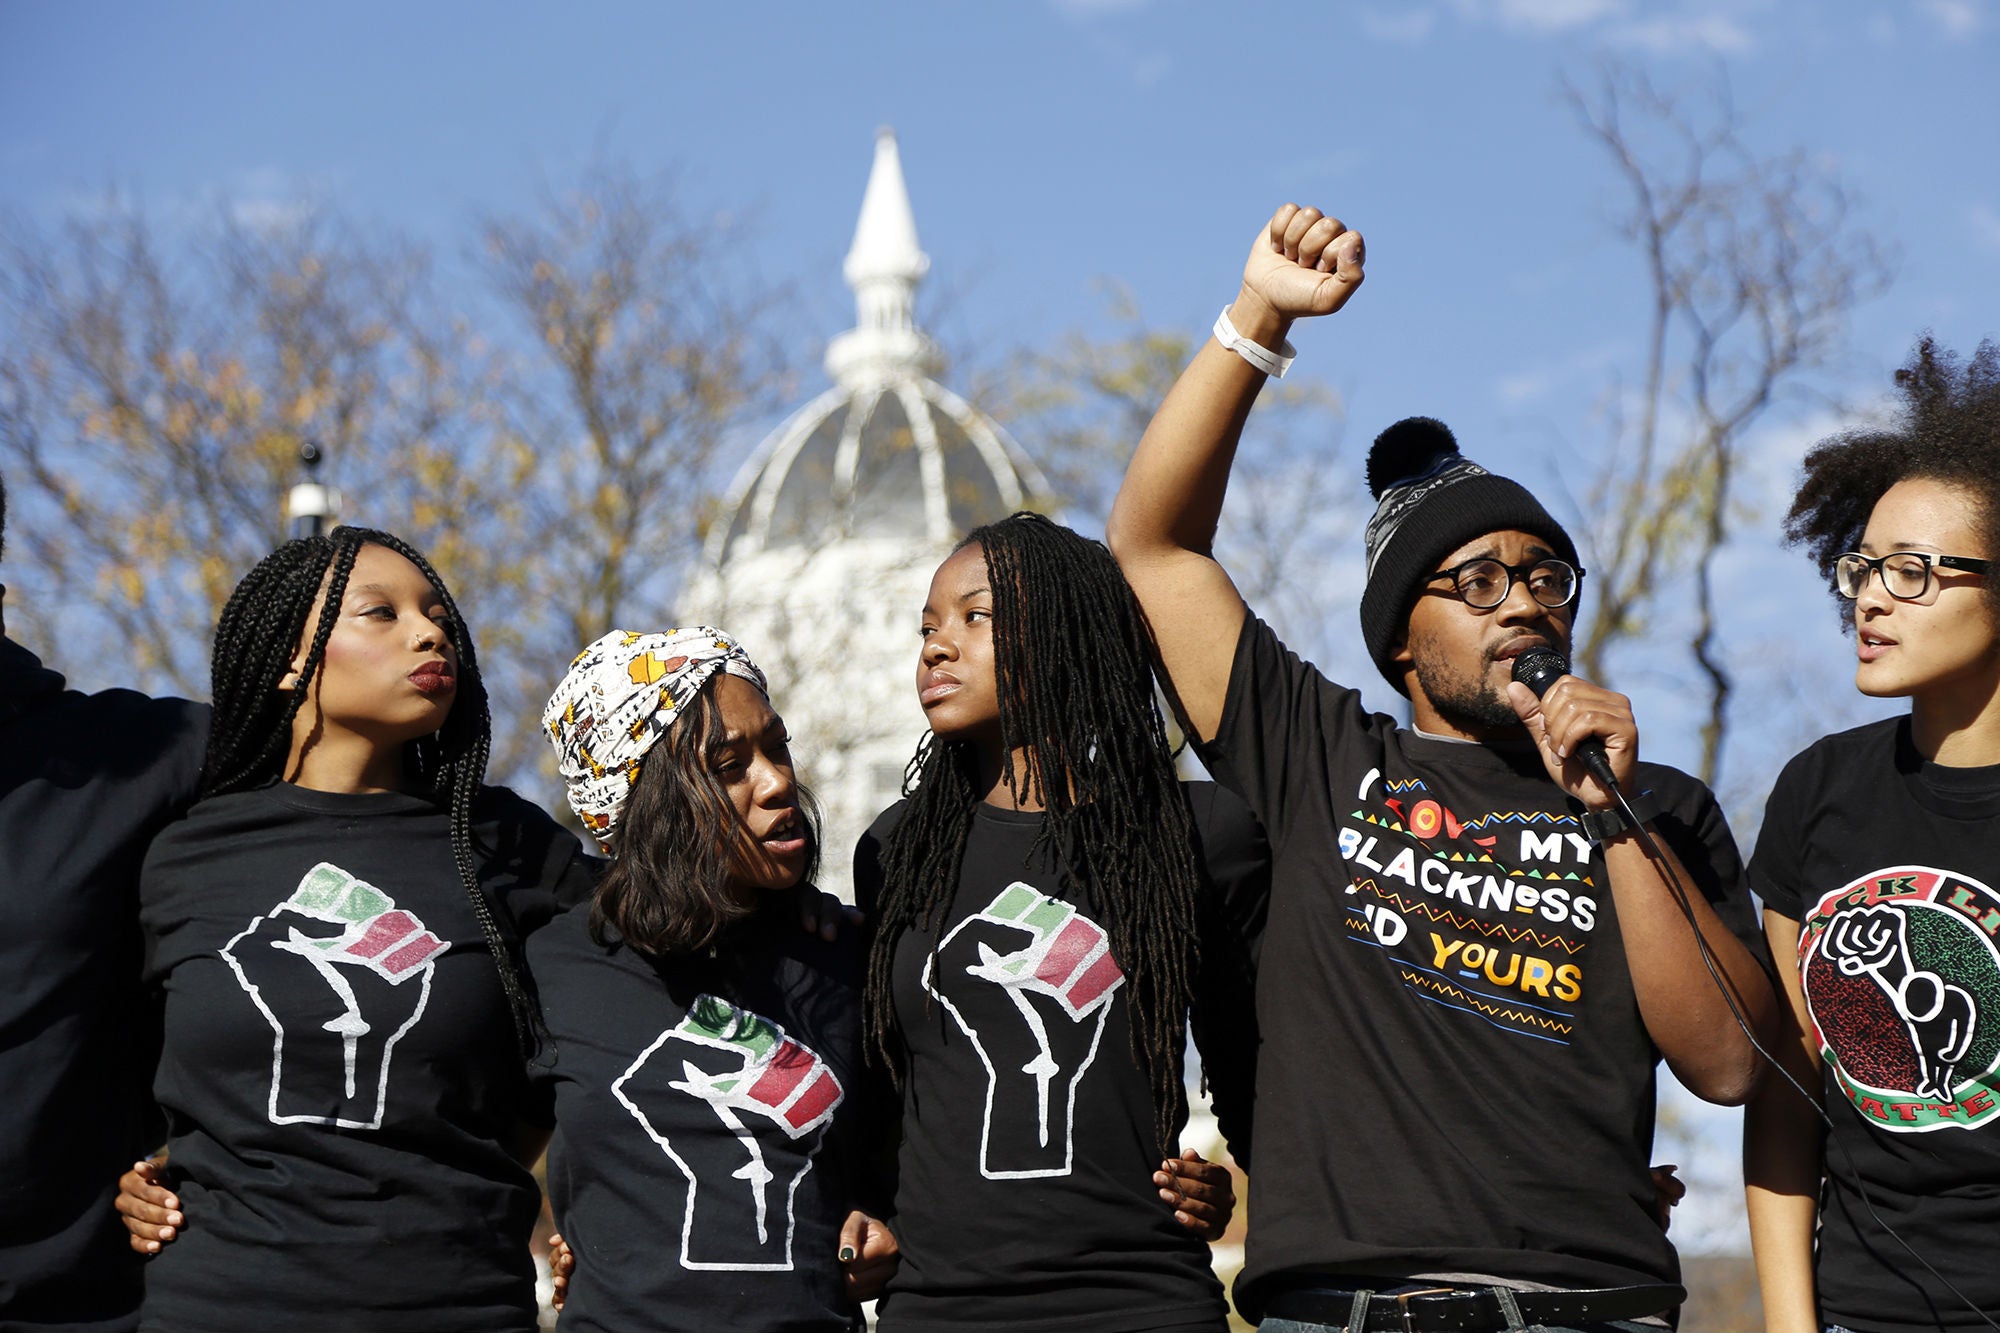 The protests have been inspired by the resignation of senior officials at the University of Missouri